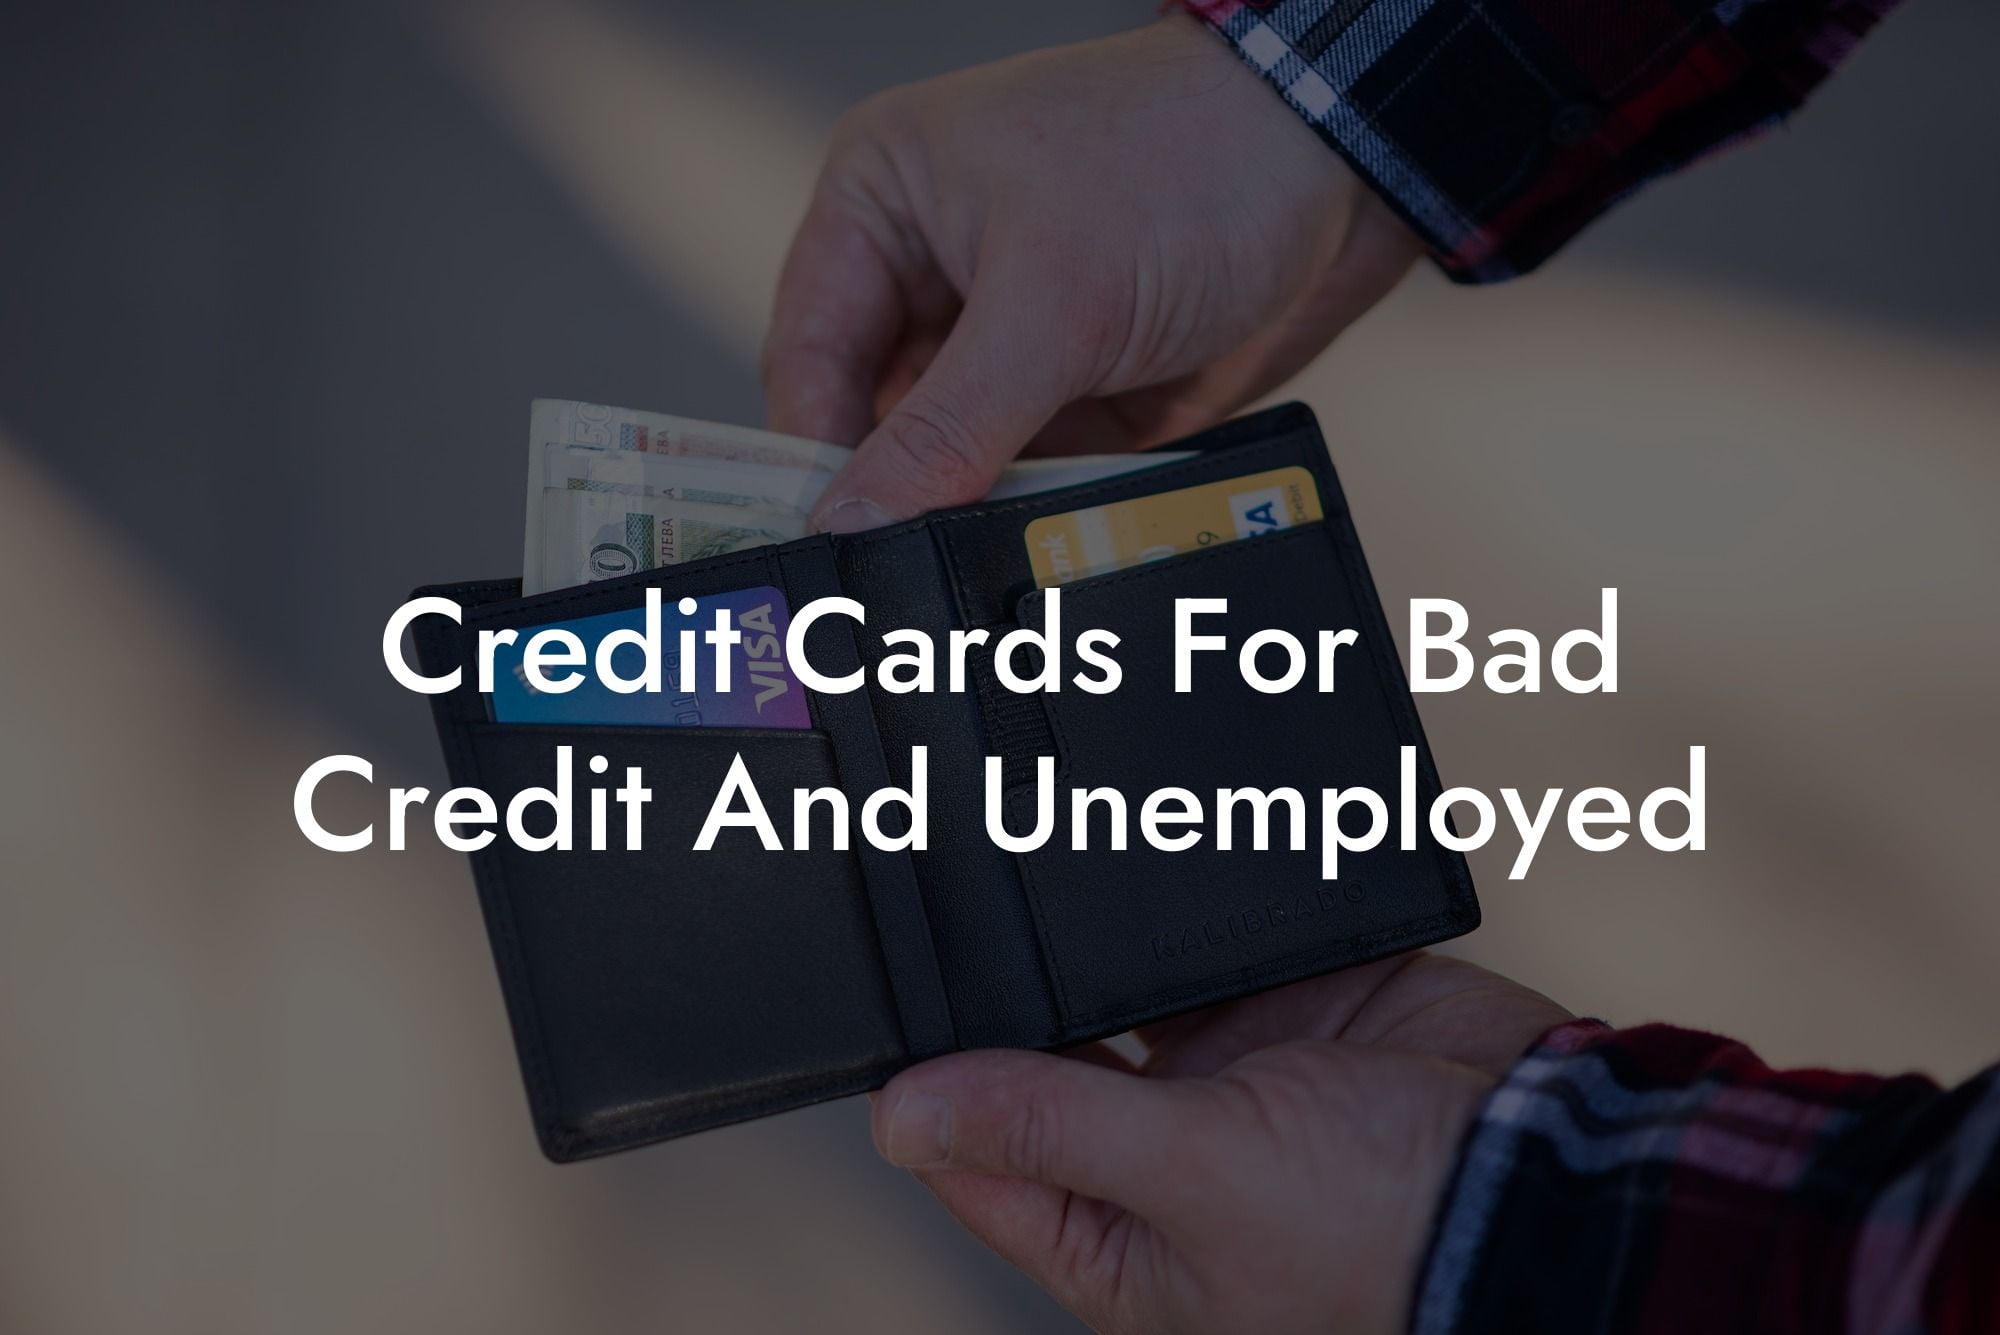 Credit Cards For Bad Credit And Unemployed